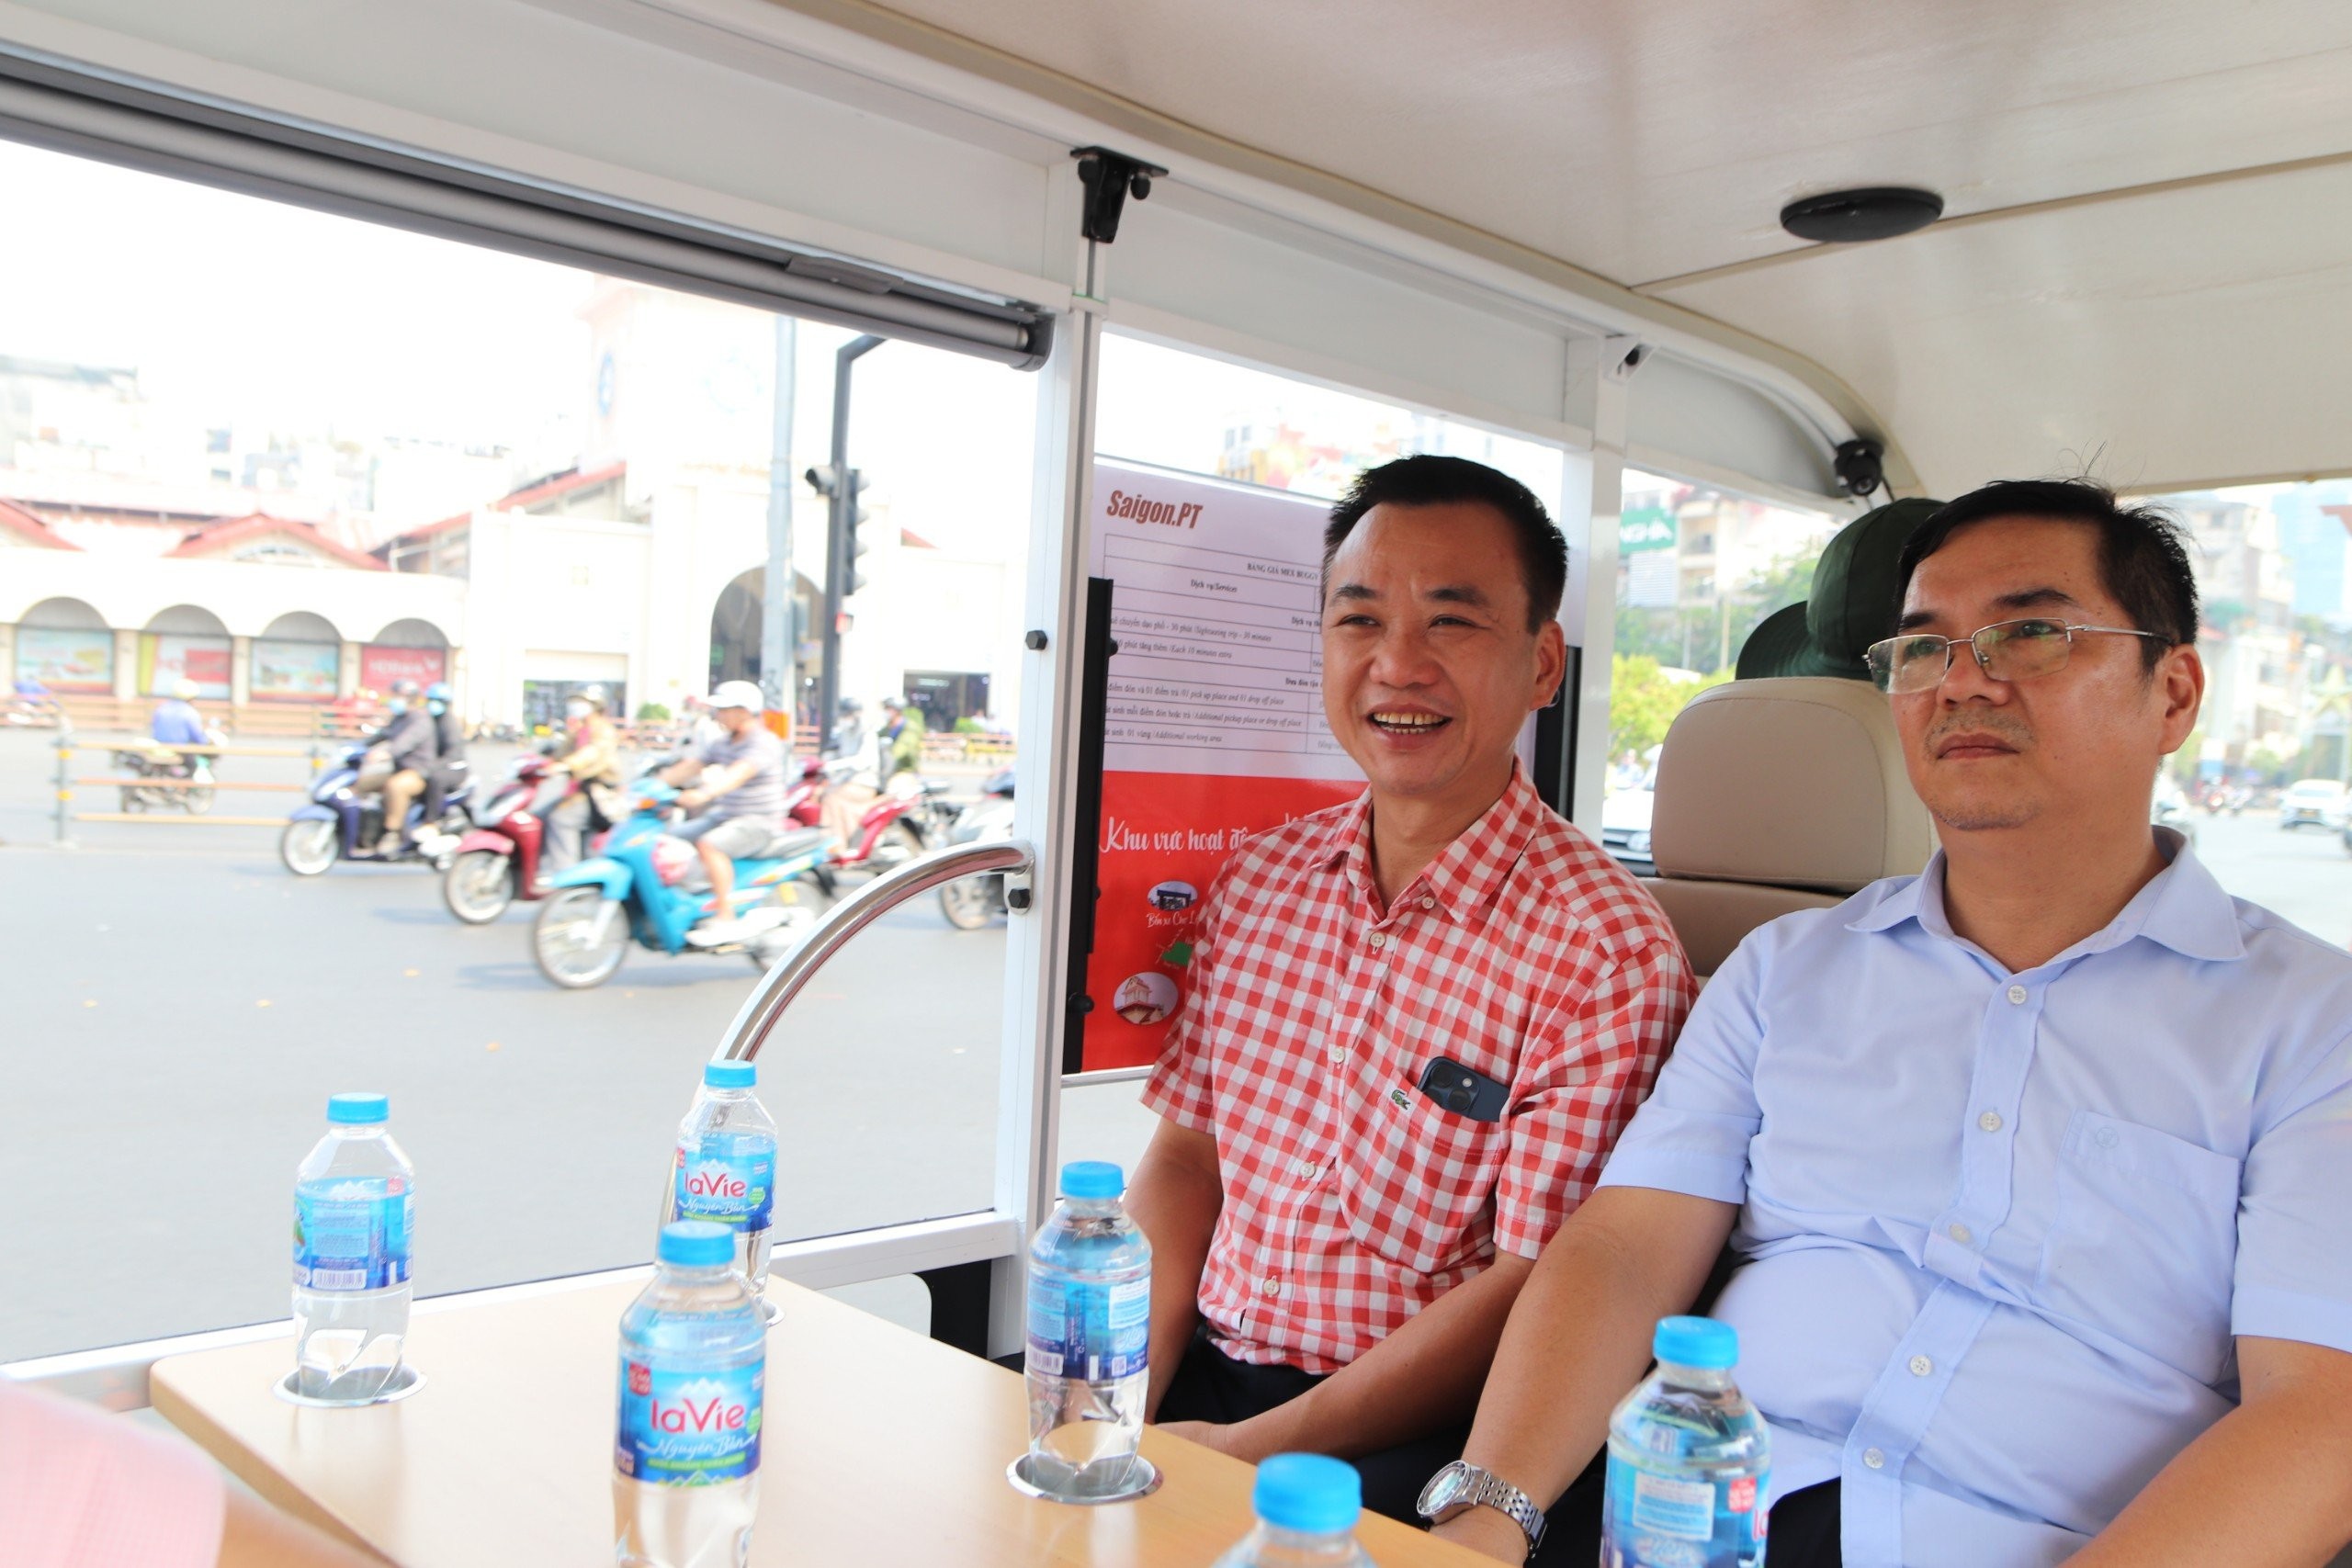 People and tourists are excited to experience the four-wheel electric vehicles powered by electricity while exploring Ho Chi Minh City.